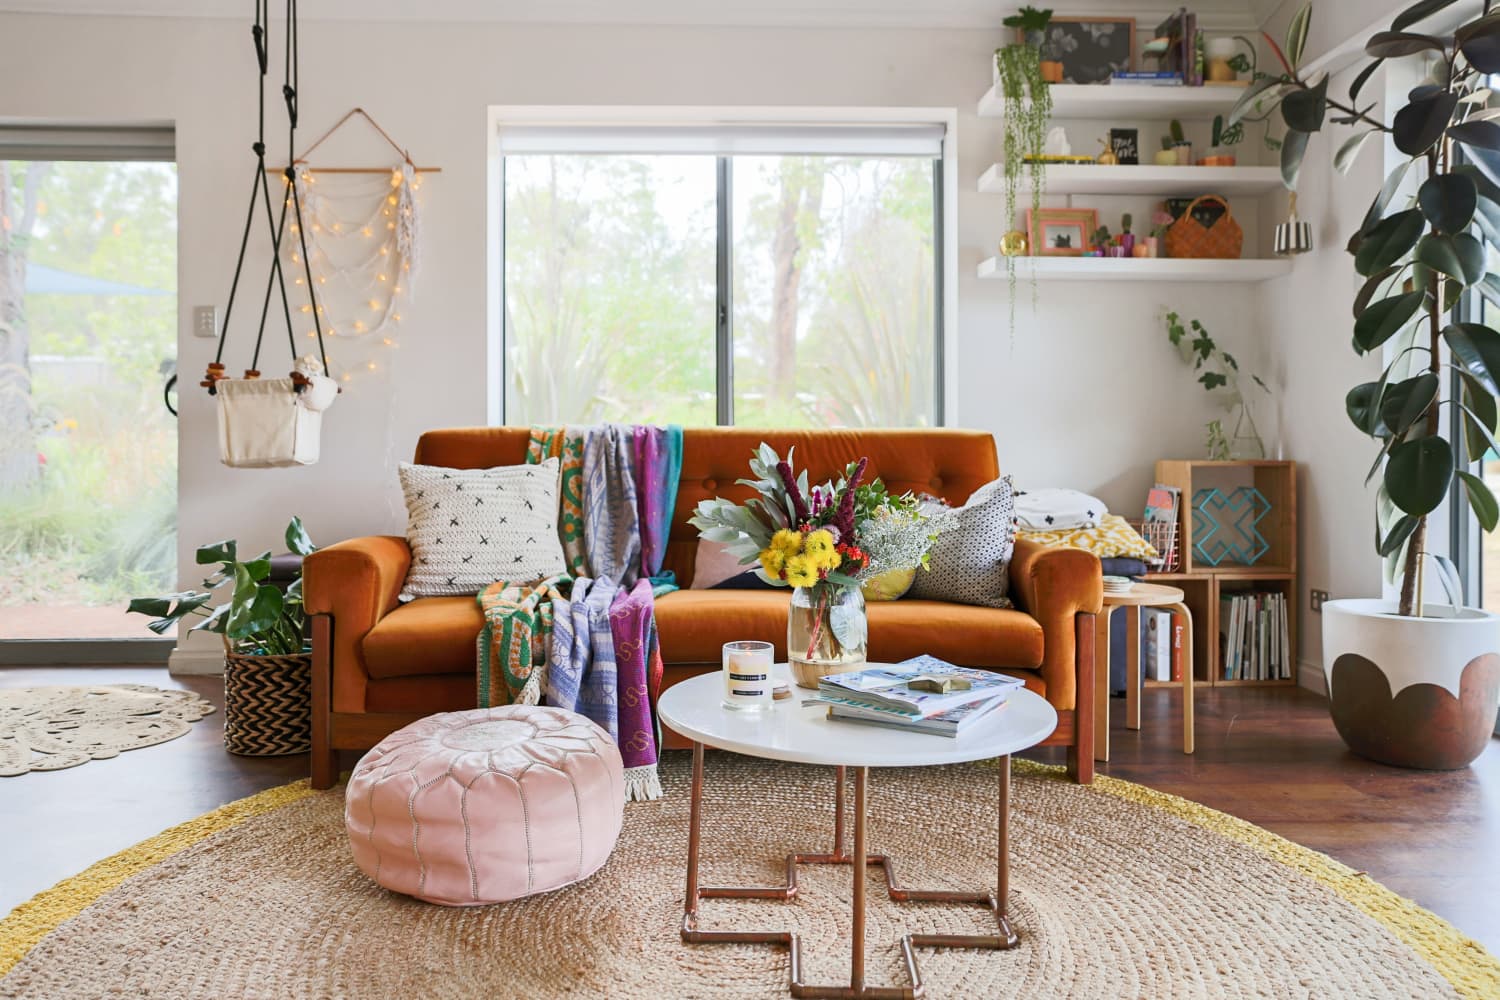 Floor Seating Ideas: Cushions, Poufs, and Pillows